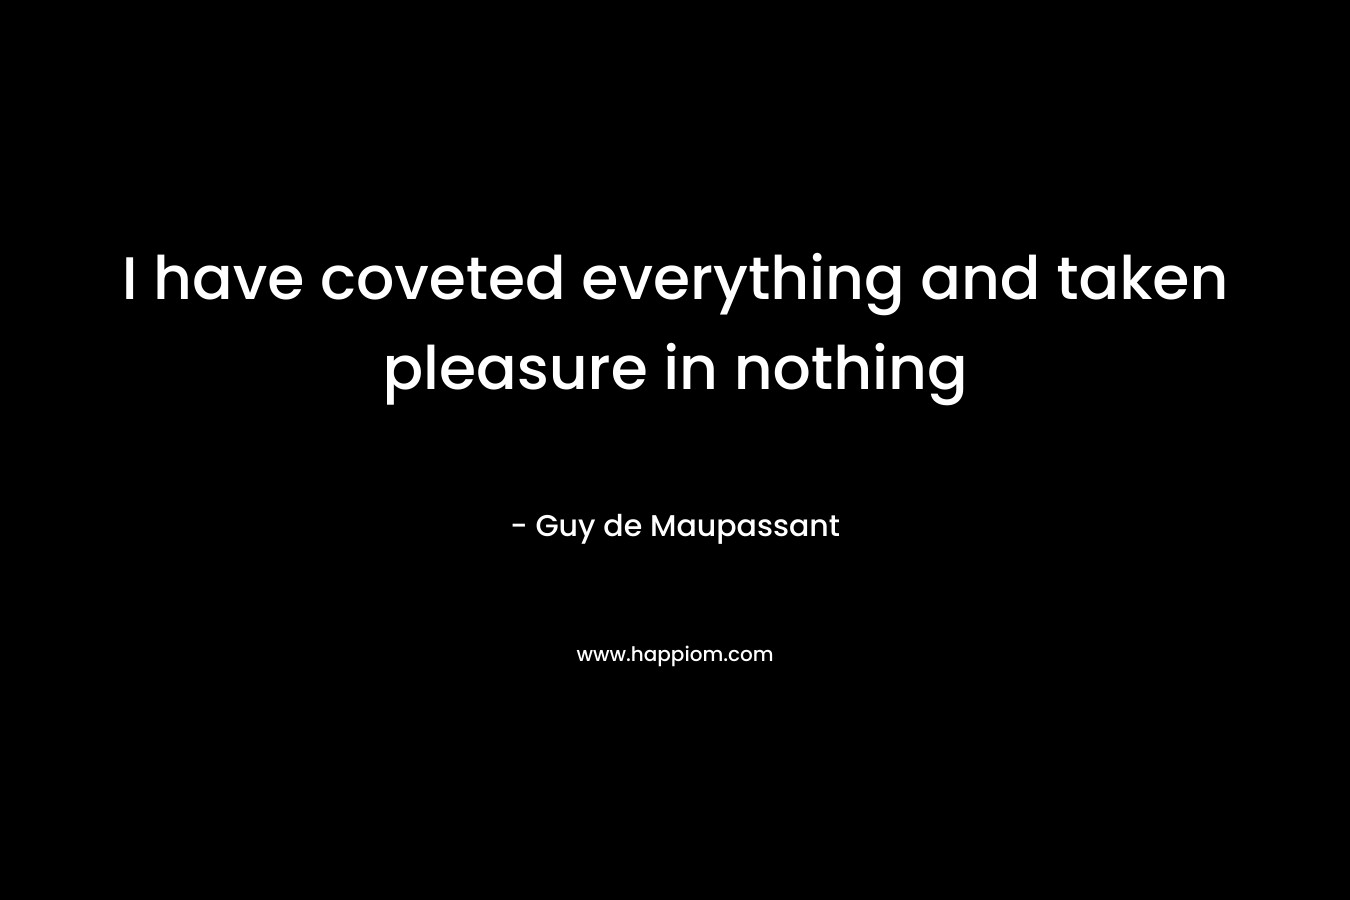 I have coveted everything and taken pleasure in nothing – Guy de Maupassant